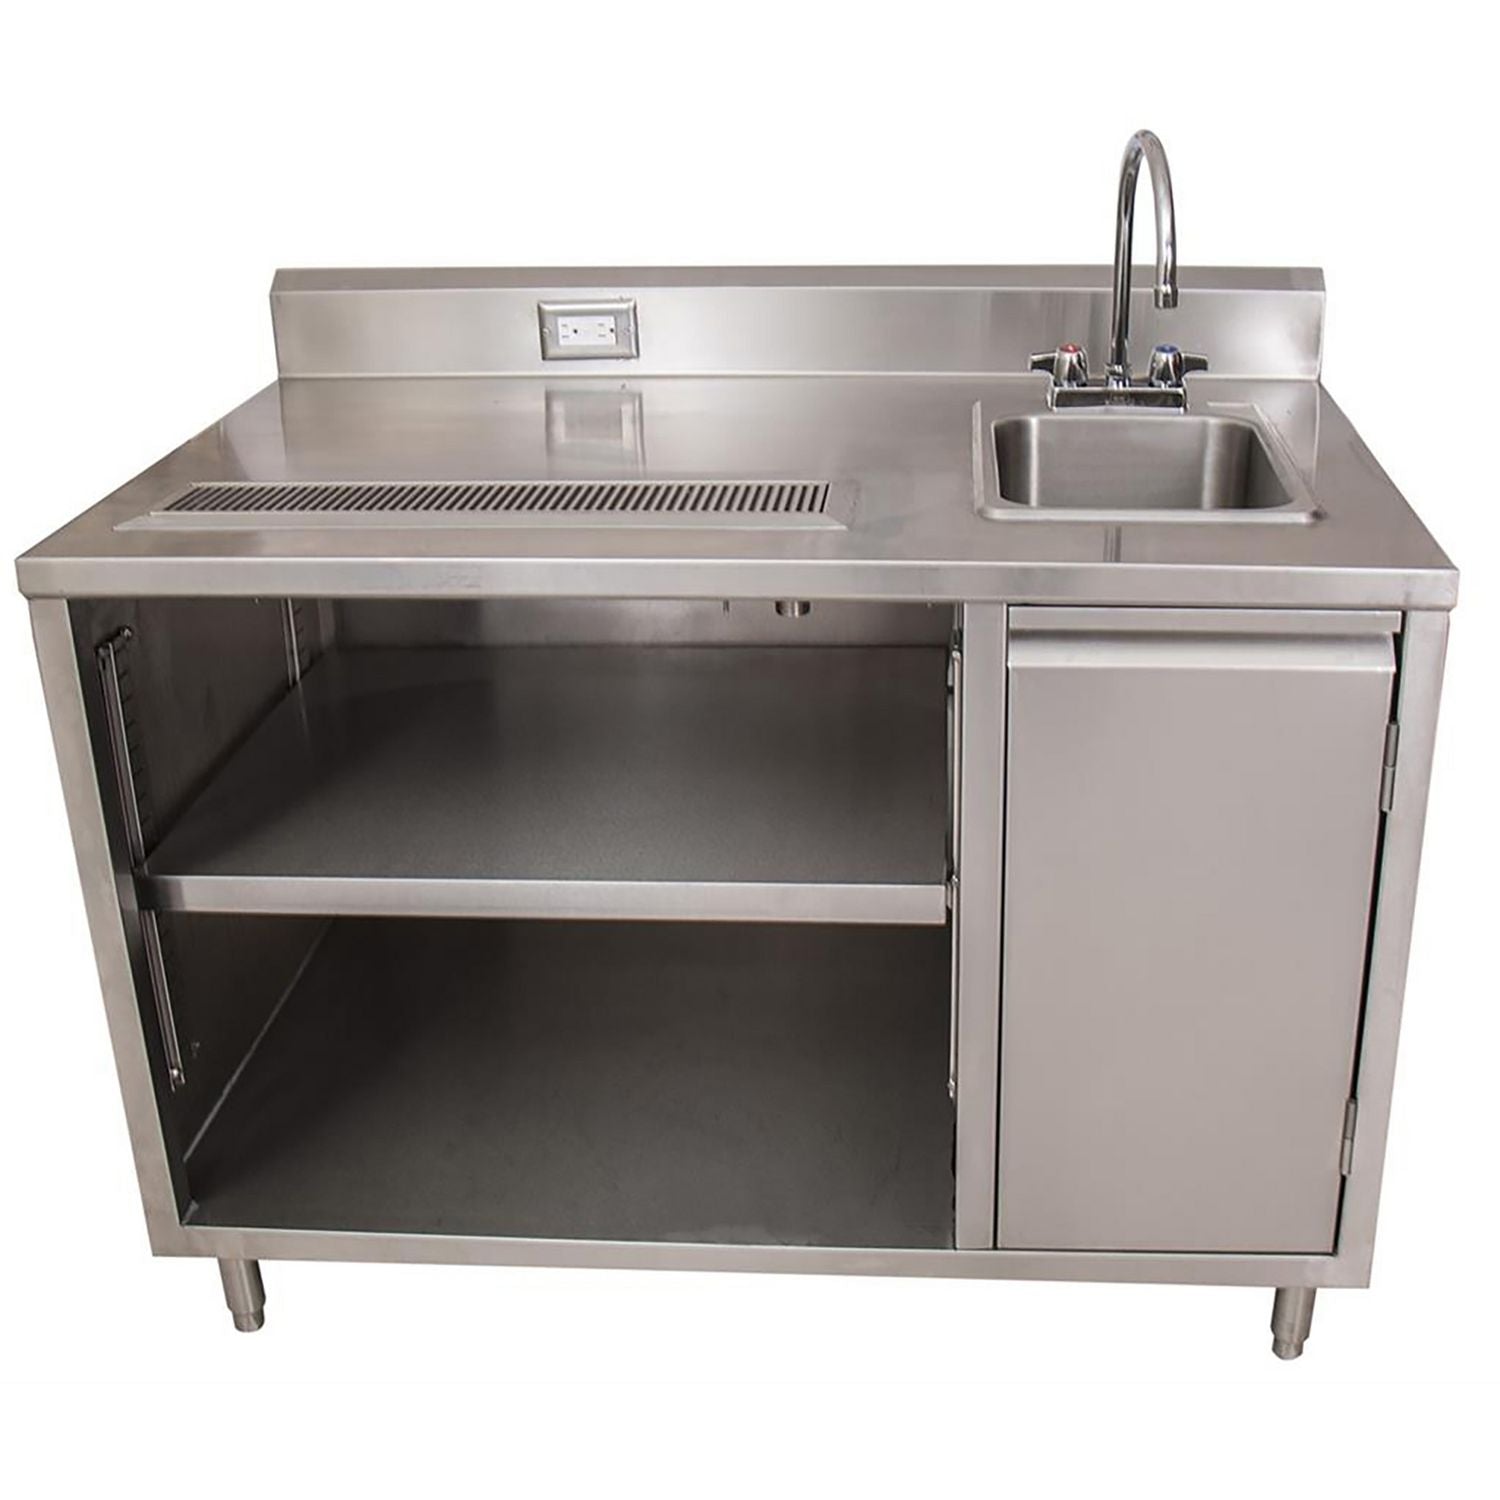 stainless-steel-beverage-table-with-right-sink-rectangular-30-x-60-x-415-silver-top-base-ships-in-4-6-business-days_bkebevt3060r - 1